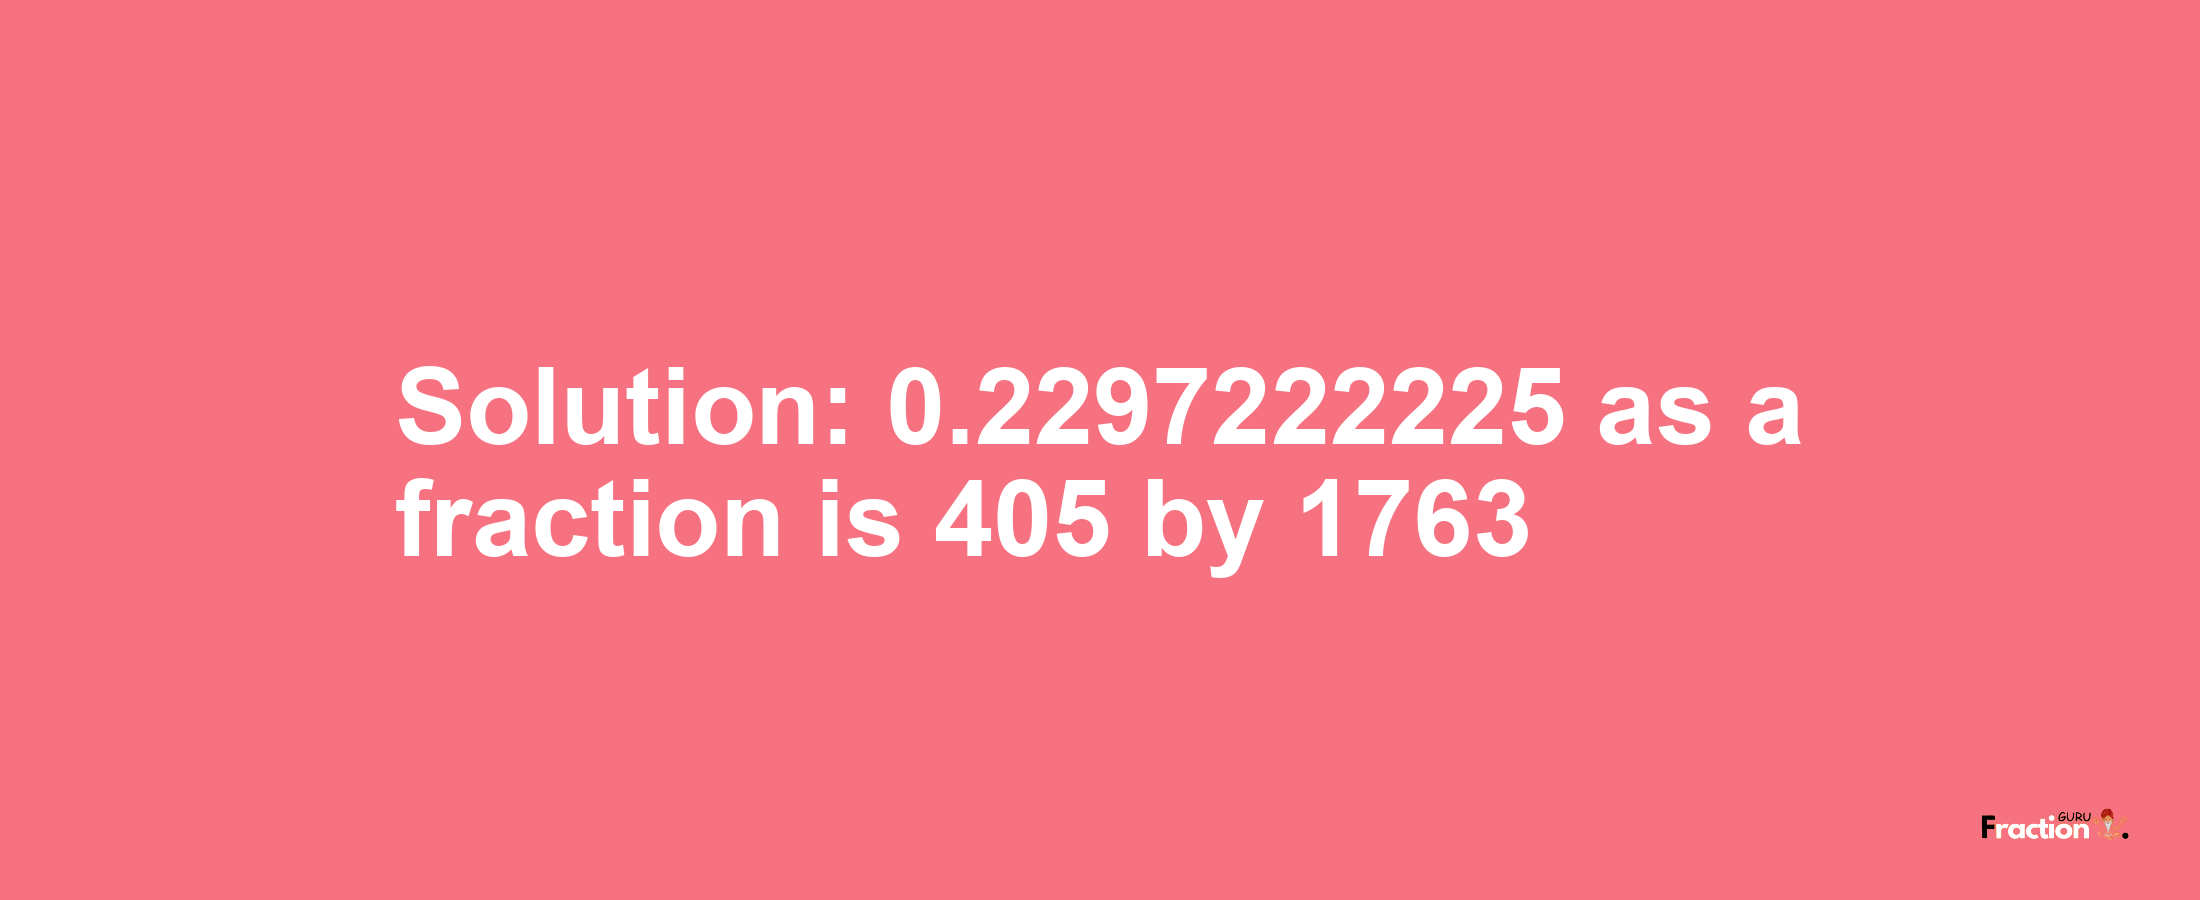 Solution:0.2297222225 as a fraction is 405/1763